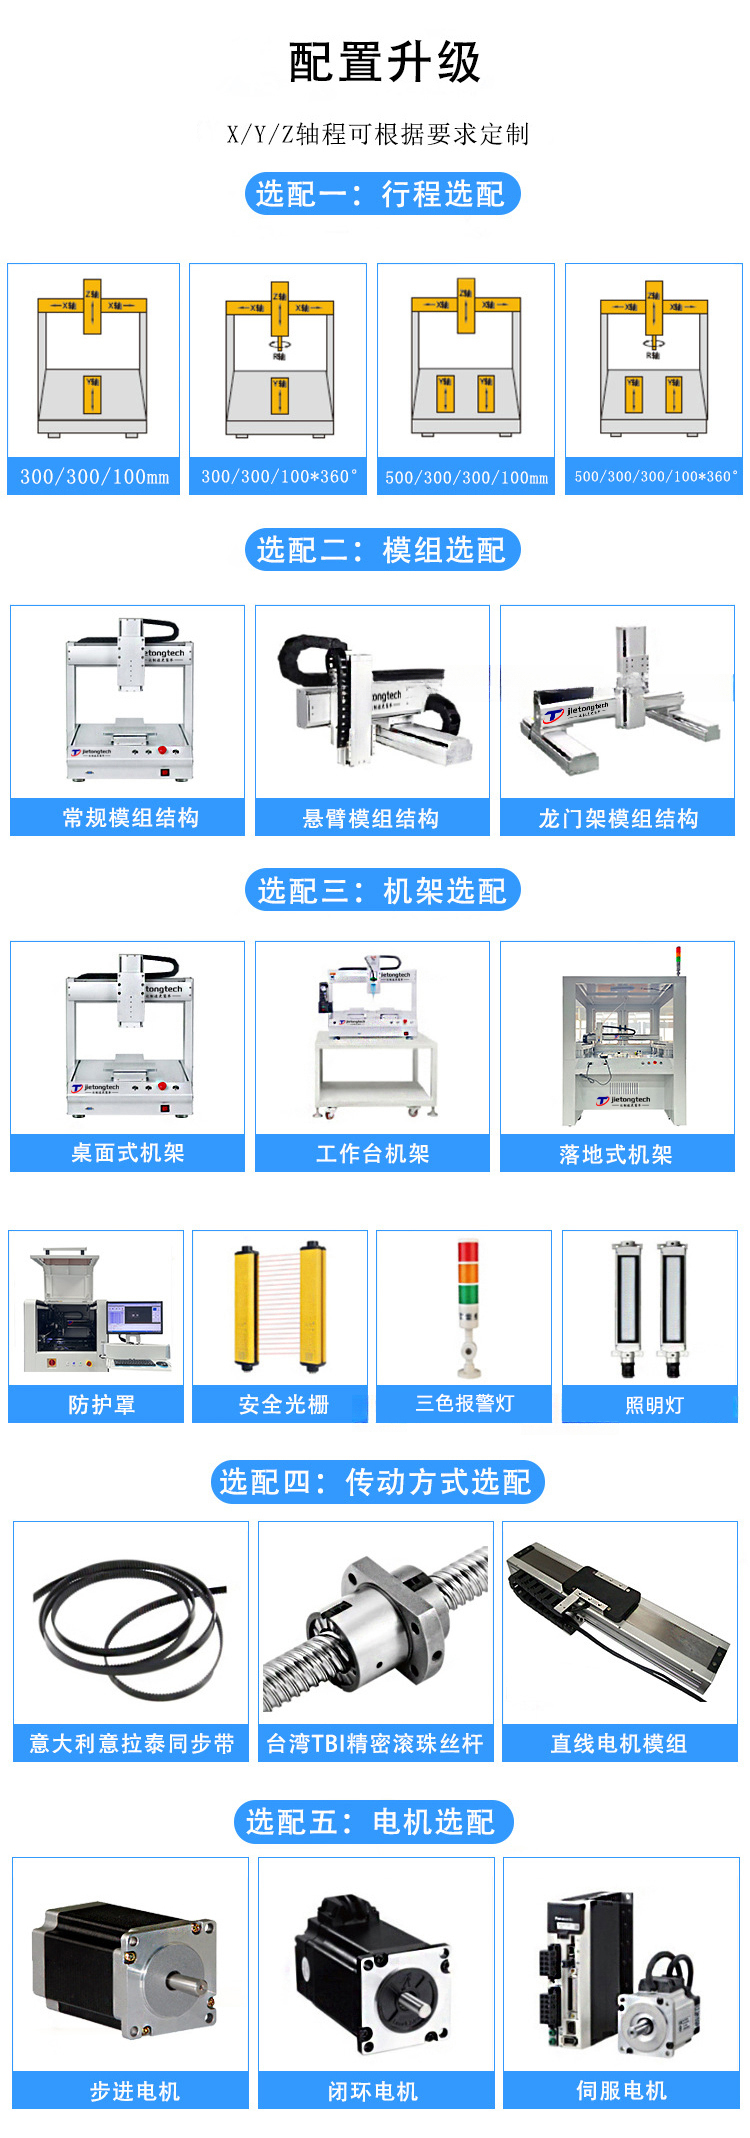 Multi axis PCB circuit board fully automatic soldering mechanical equipment charger USB one to two spot welding and tin feeding robot